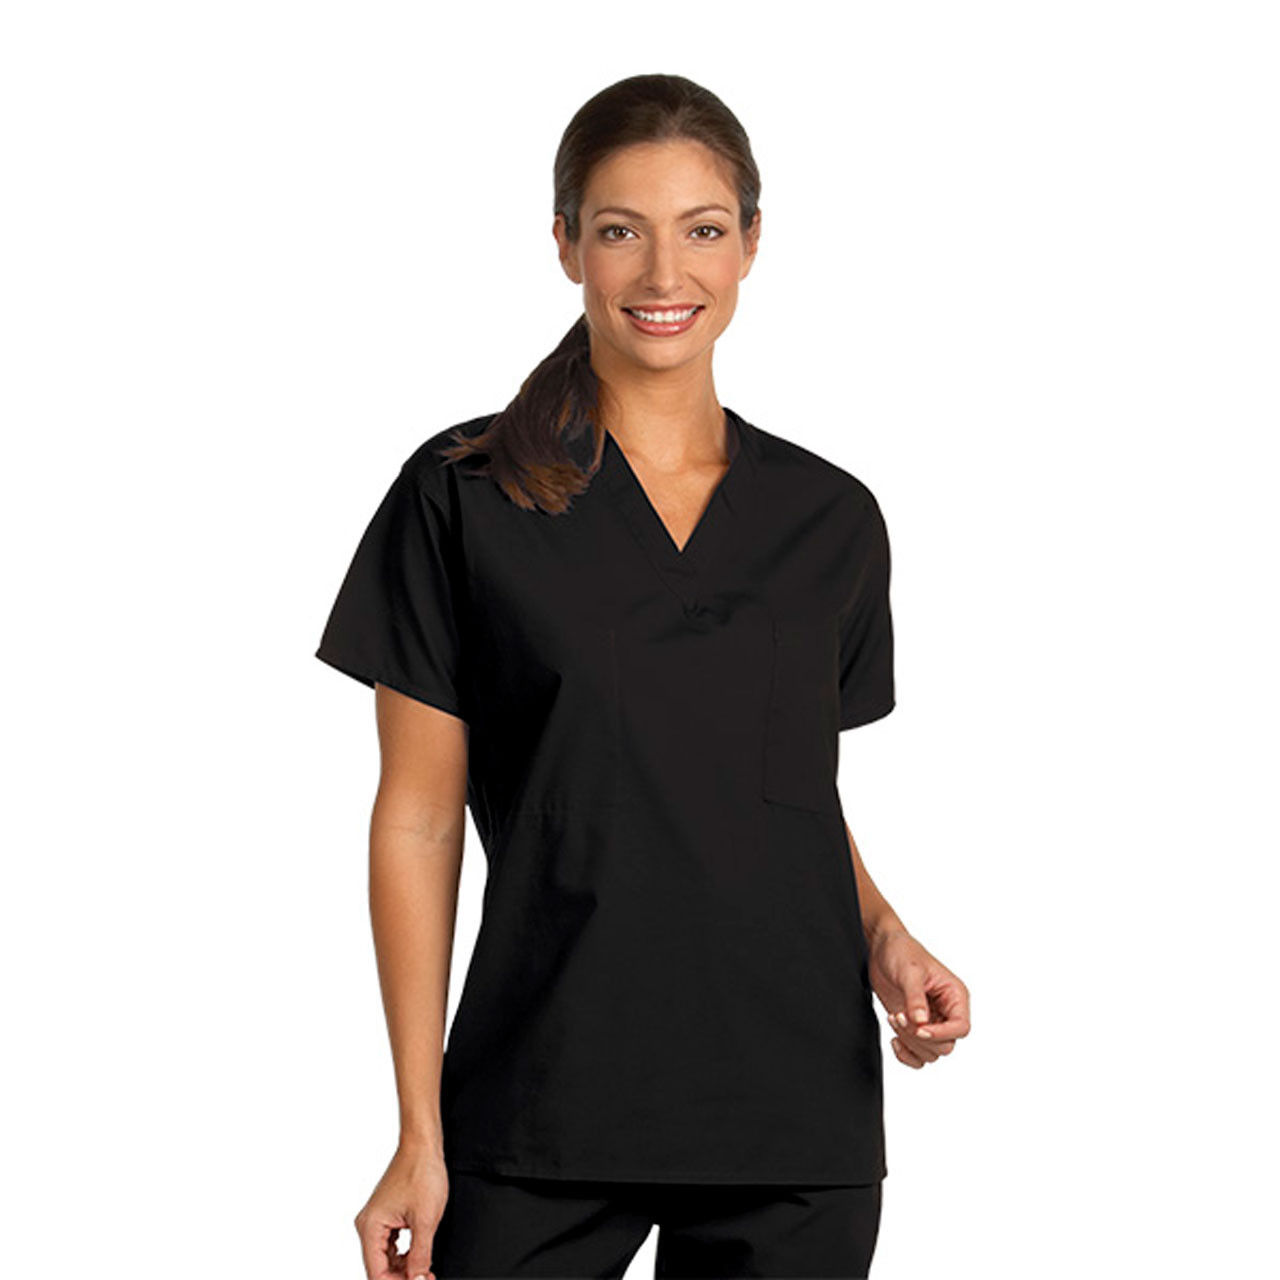 Are these black medical scrubs suitable for all work environments?